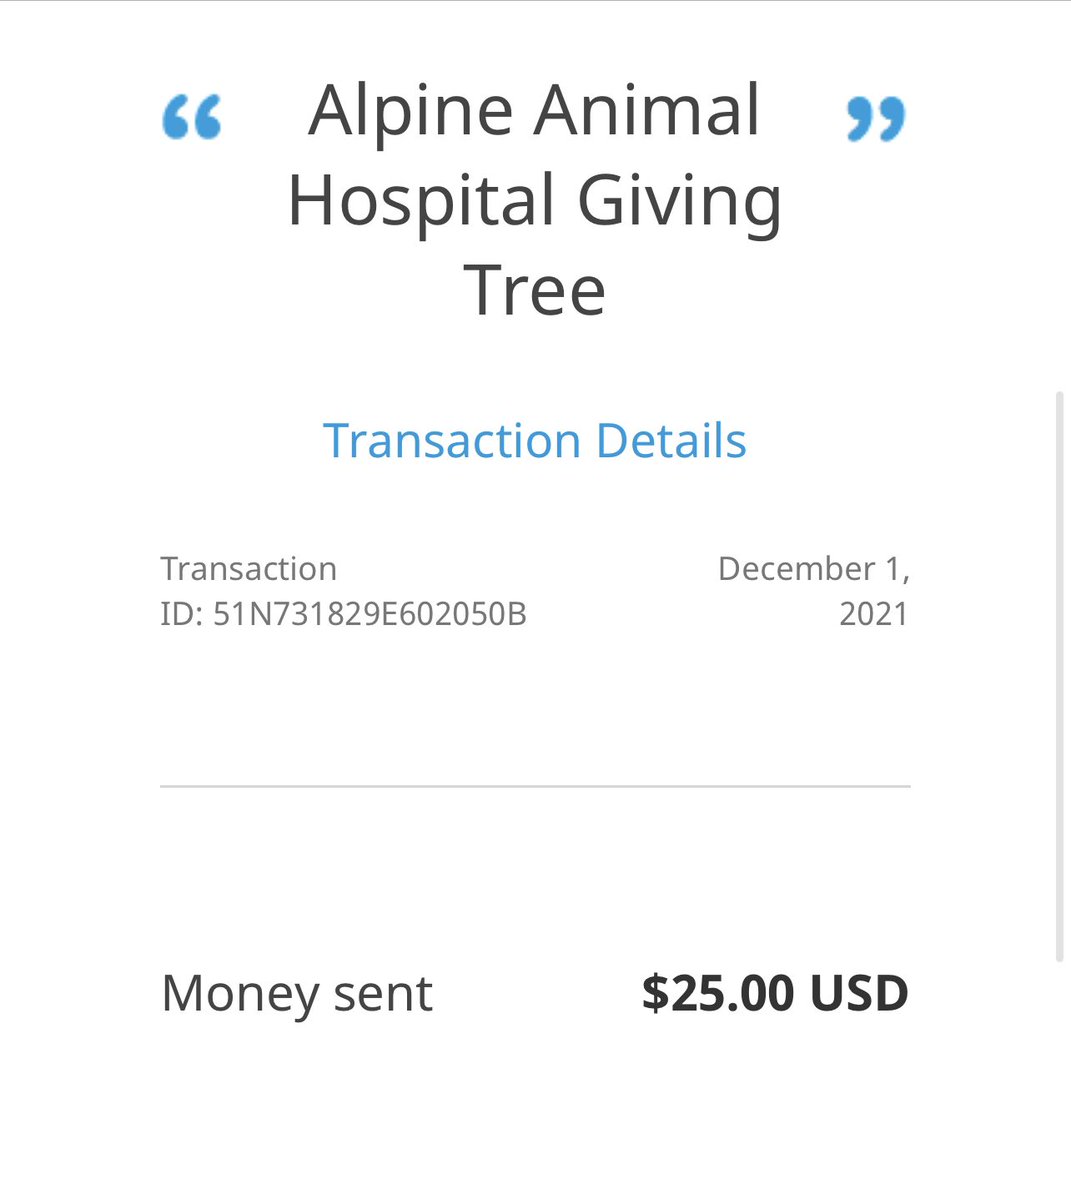 Without your support we wouldn’t be making donations like these! ❤️❤️❤️ $100 to @TheGoldenRatio4 and $25 to Alpine Animal Hospital in honor of @tine_theherd 🐾❤️🐶

#GivingTuesday2021 #giving #WednesdayFeeling #wednesdayvibe #donate #dogsoftwitter #dogs #givingtree #SmallBiz